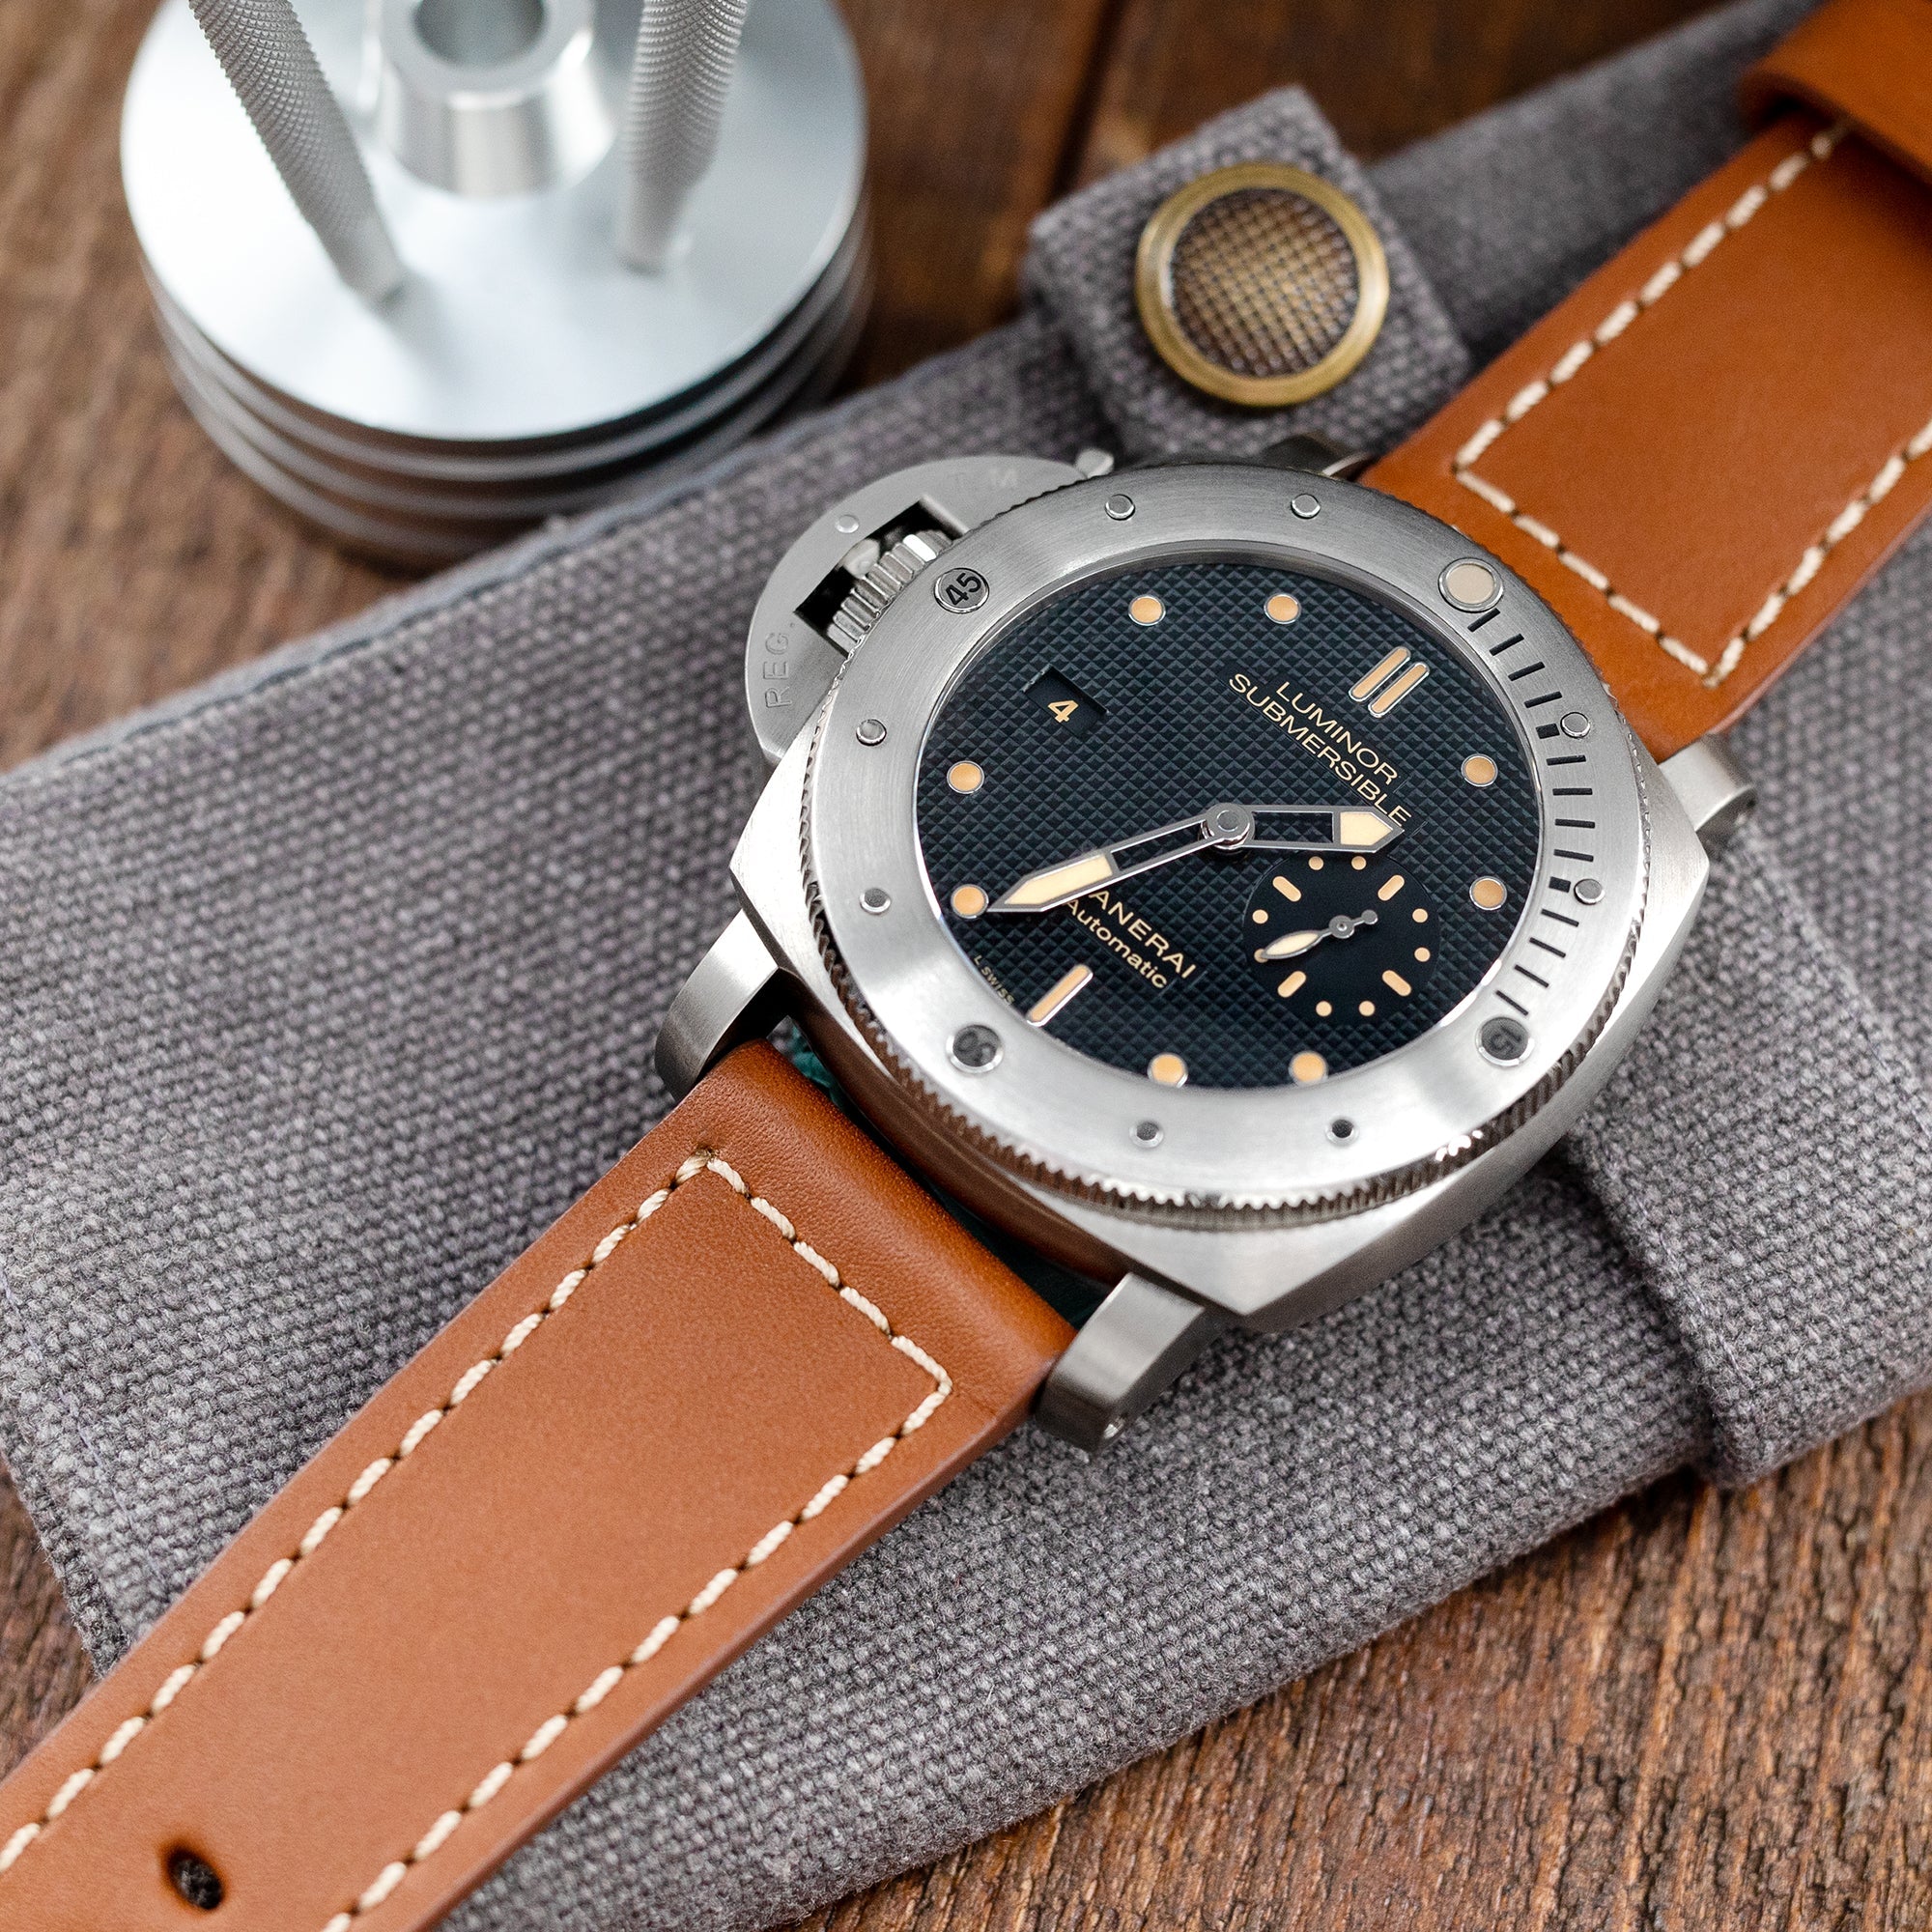 Panerai Luminor Submersible 1950 Left-Handed 3 Days Automatic PAM569 Strapcode watch bands